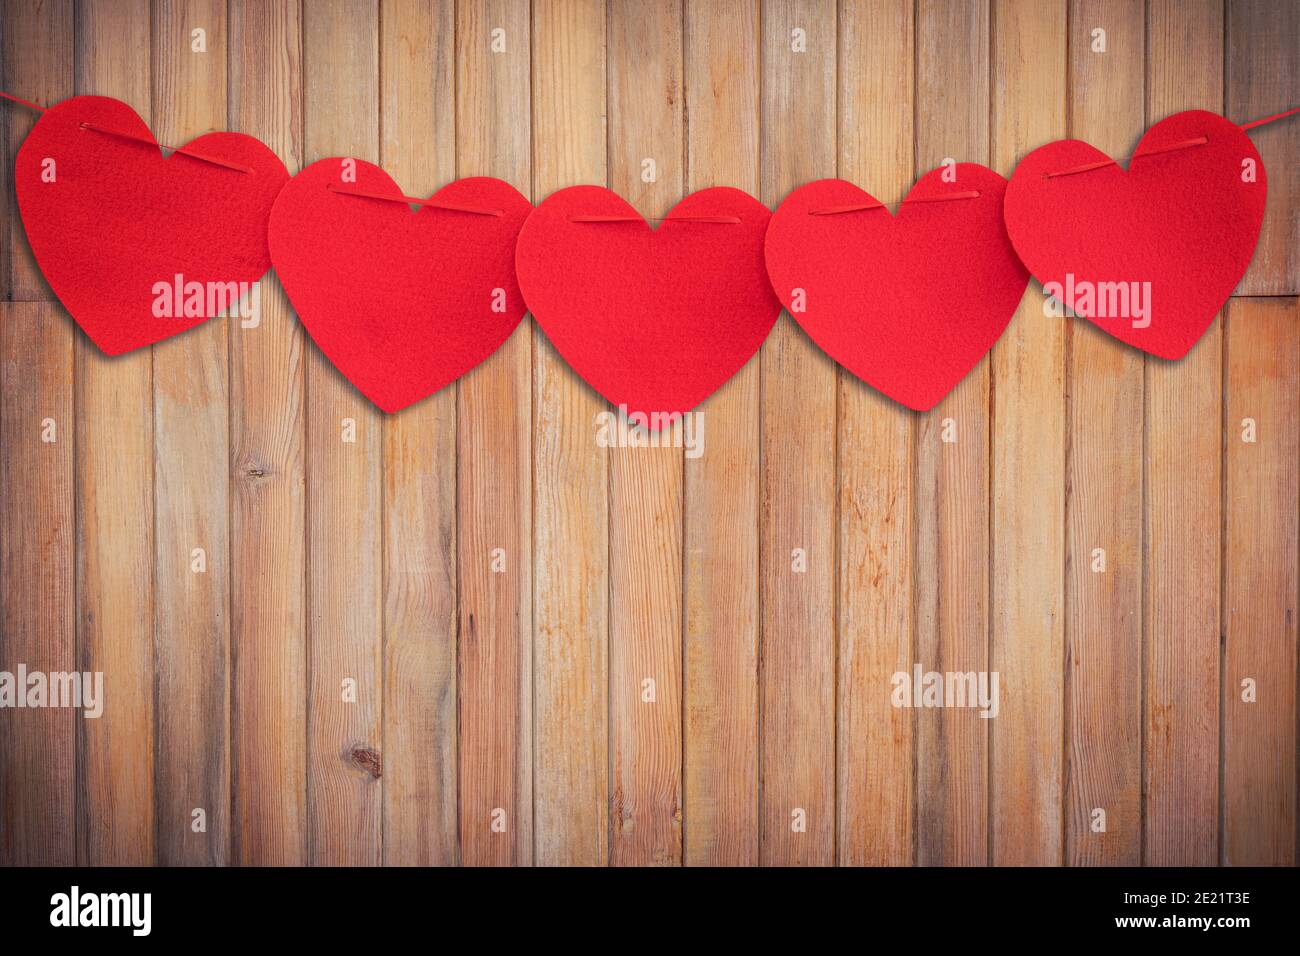 Red heart hanging on Wood Background and Texture vertical. Stock Photo